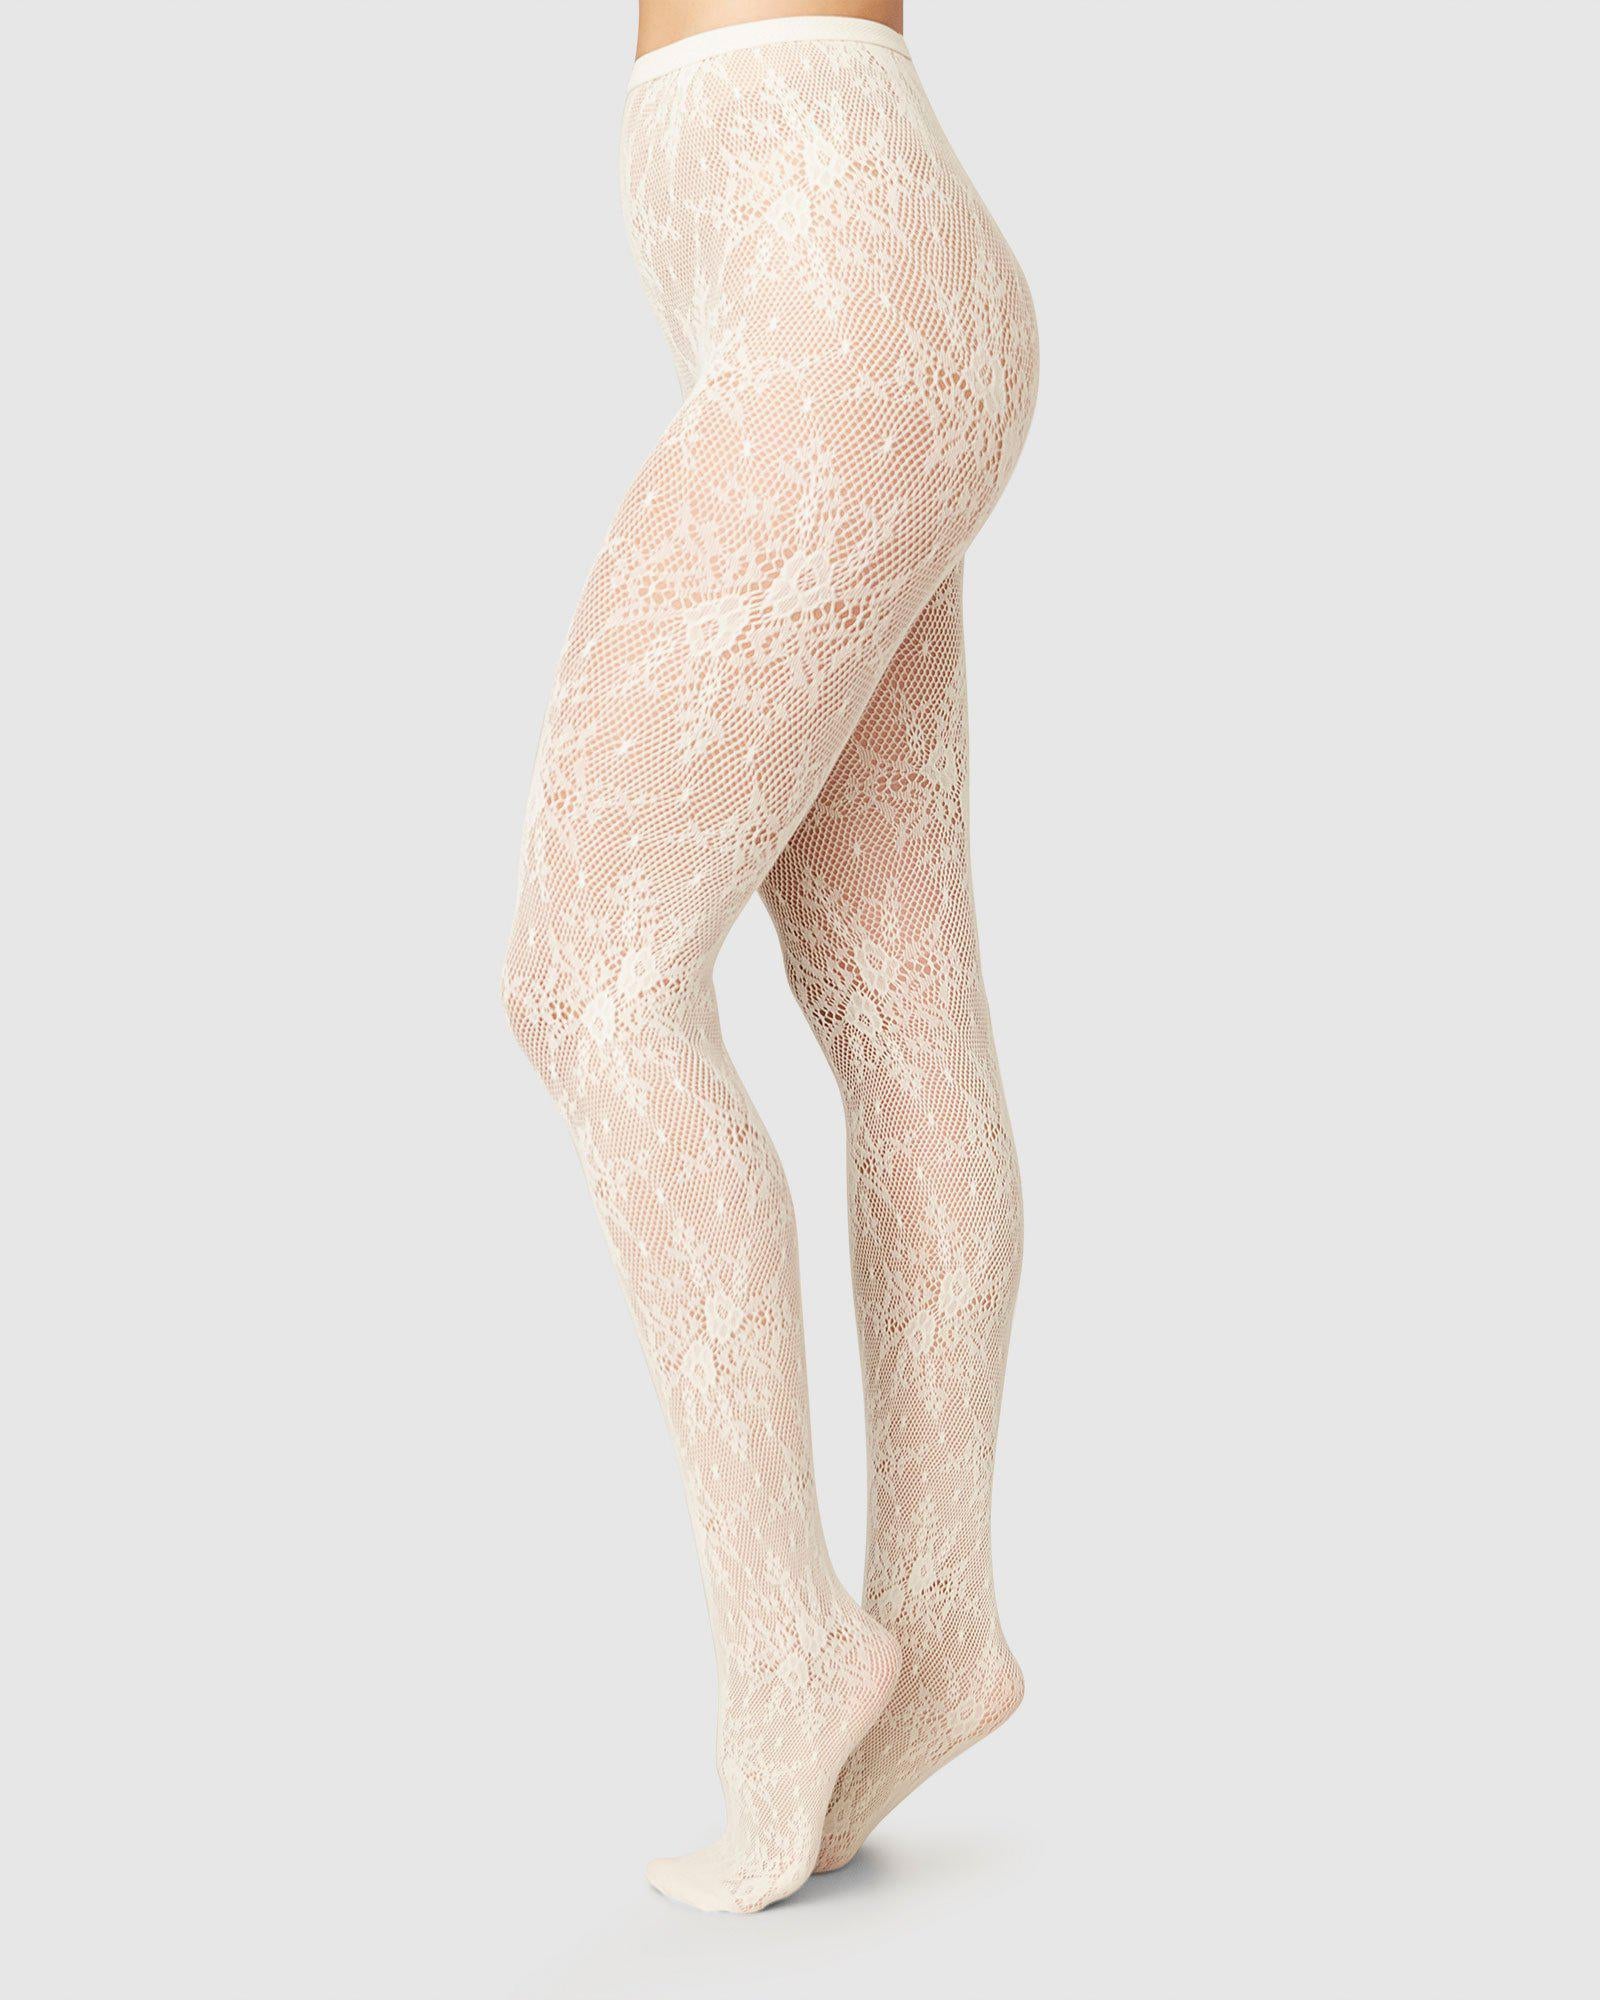 Wolford Shapewear Pantyhose — choose from 4 items